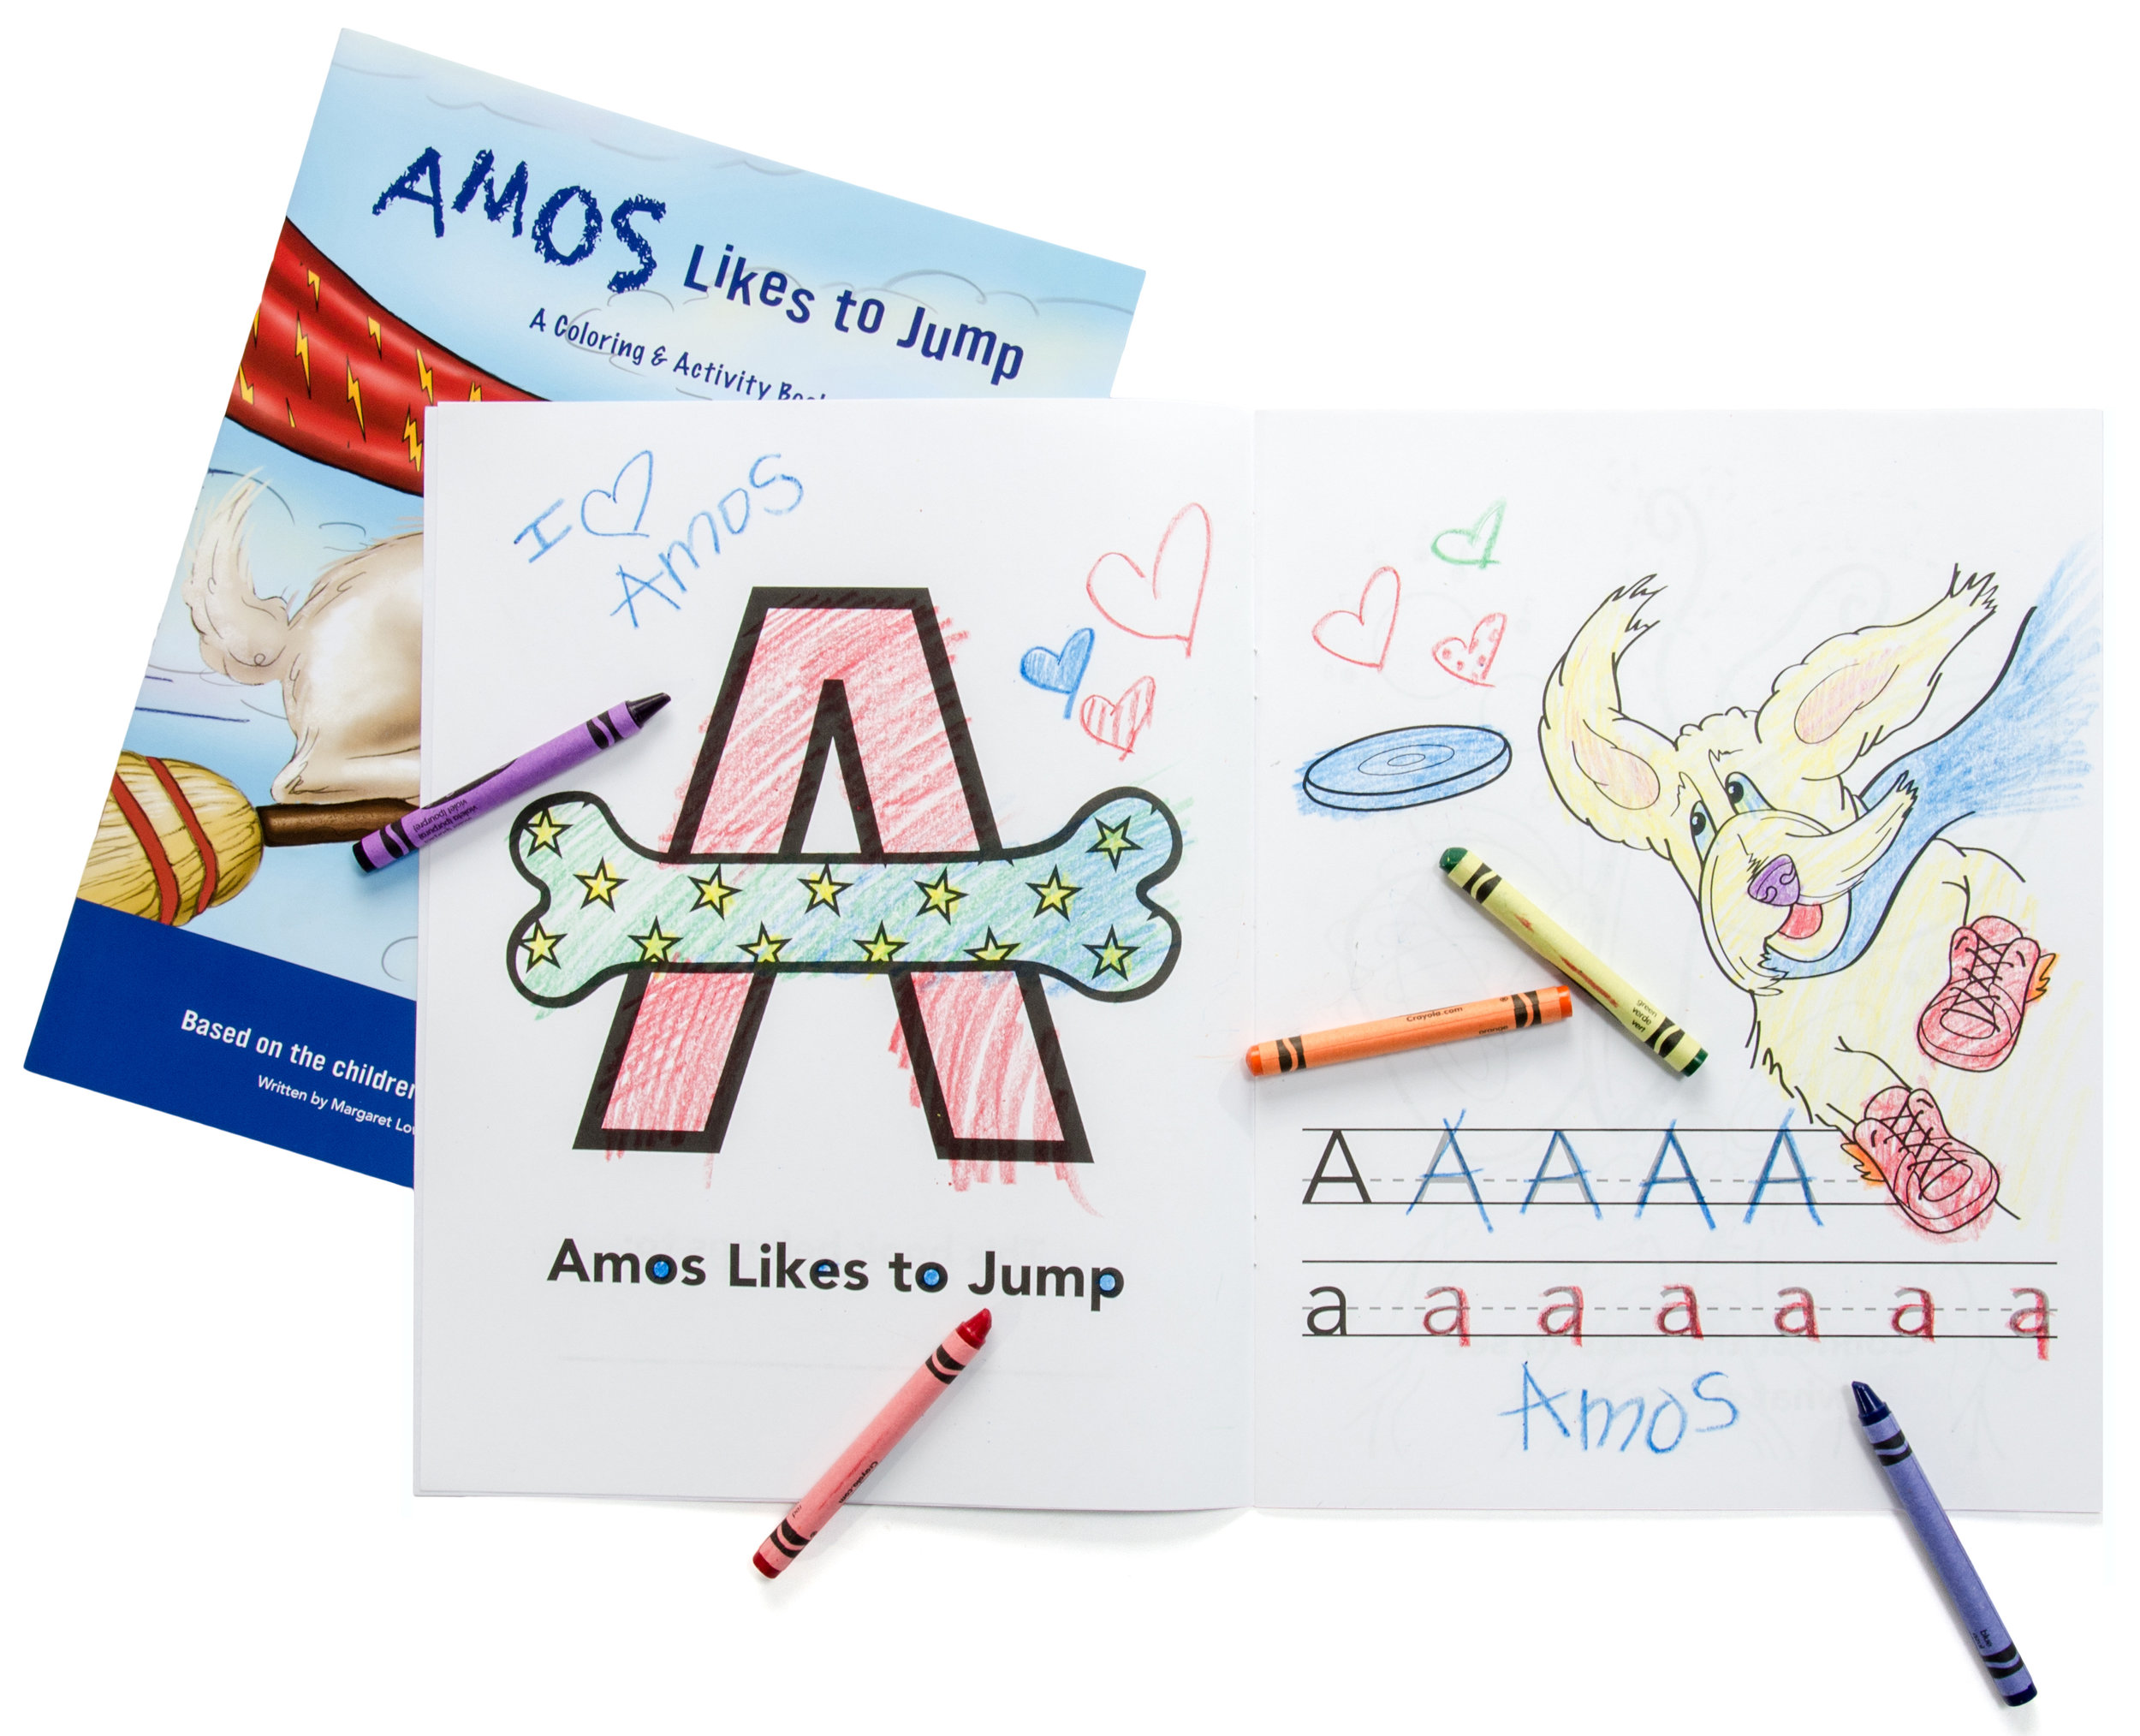 Amos_%22Likes to Jump%22_Coloring Book _ inside _02.jpg